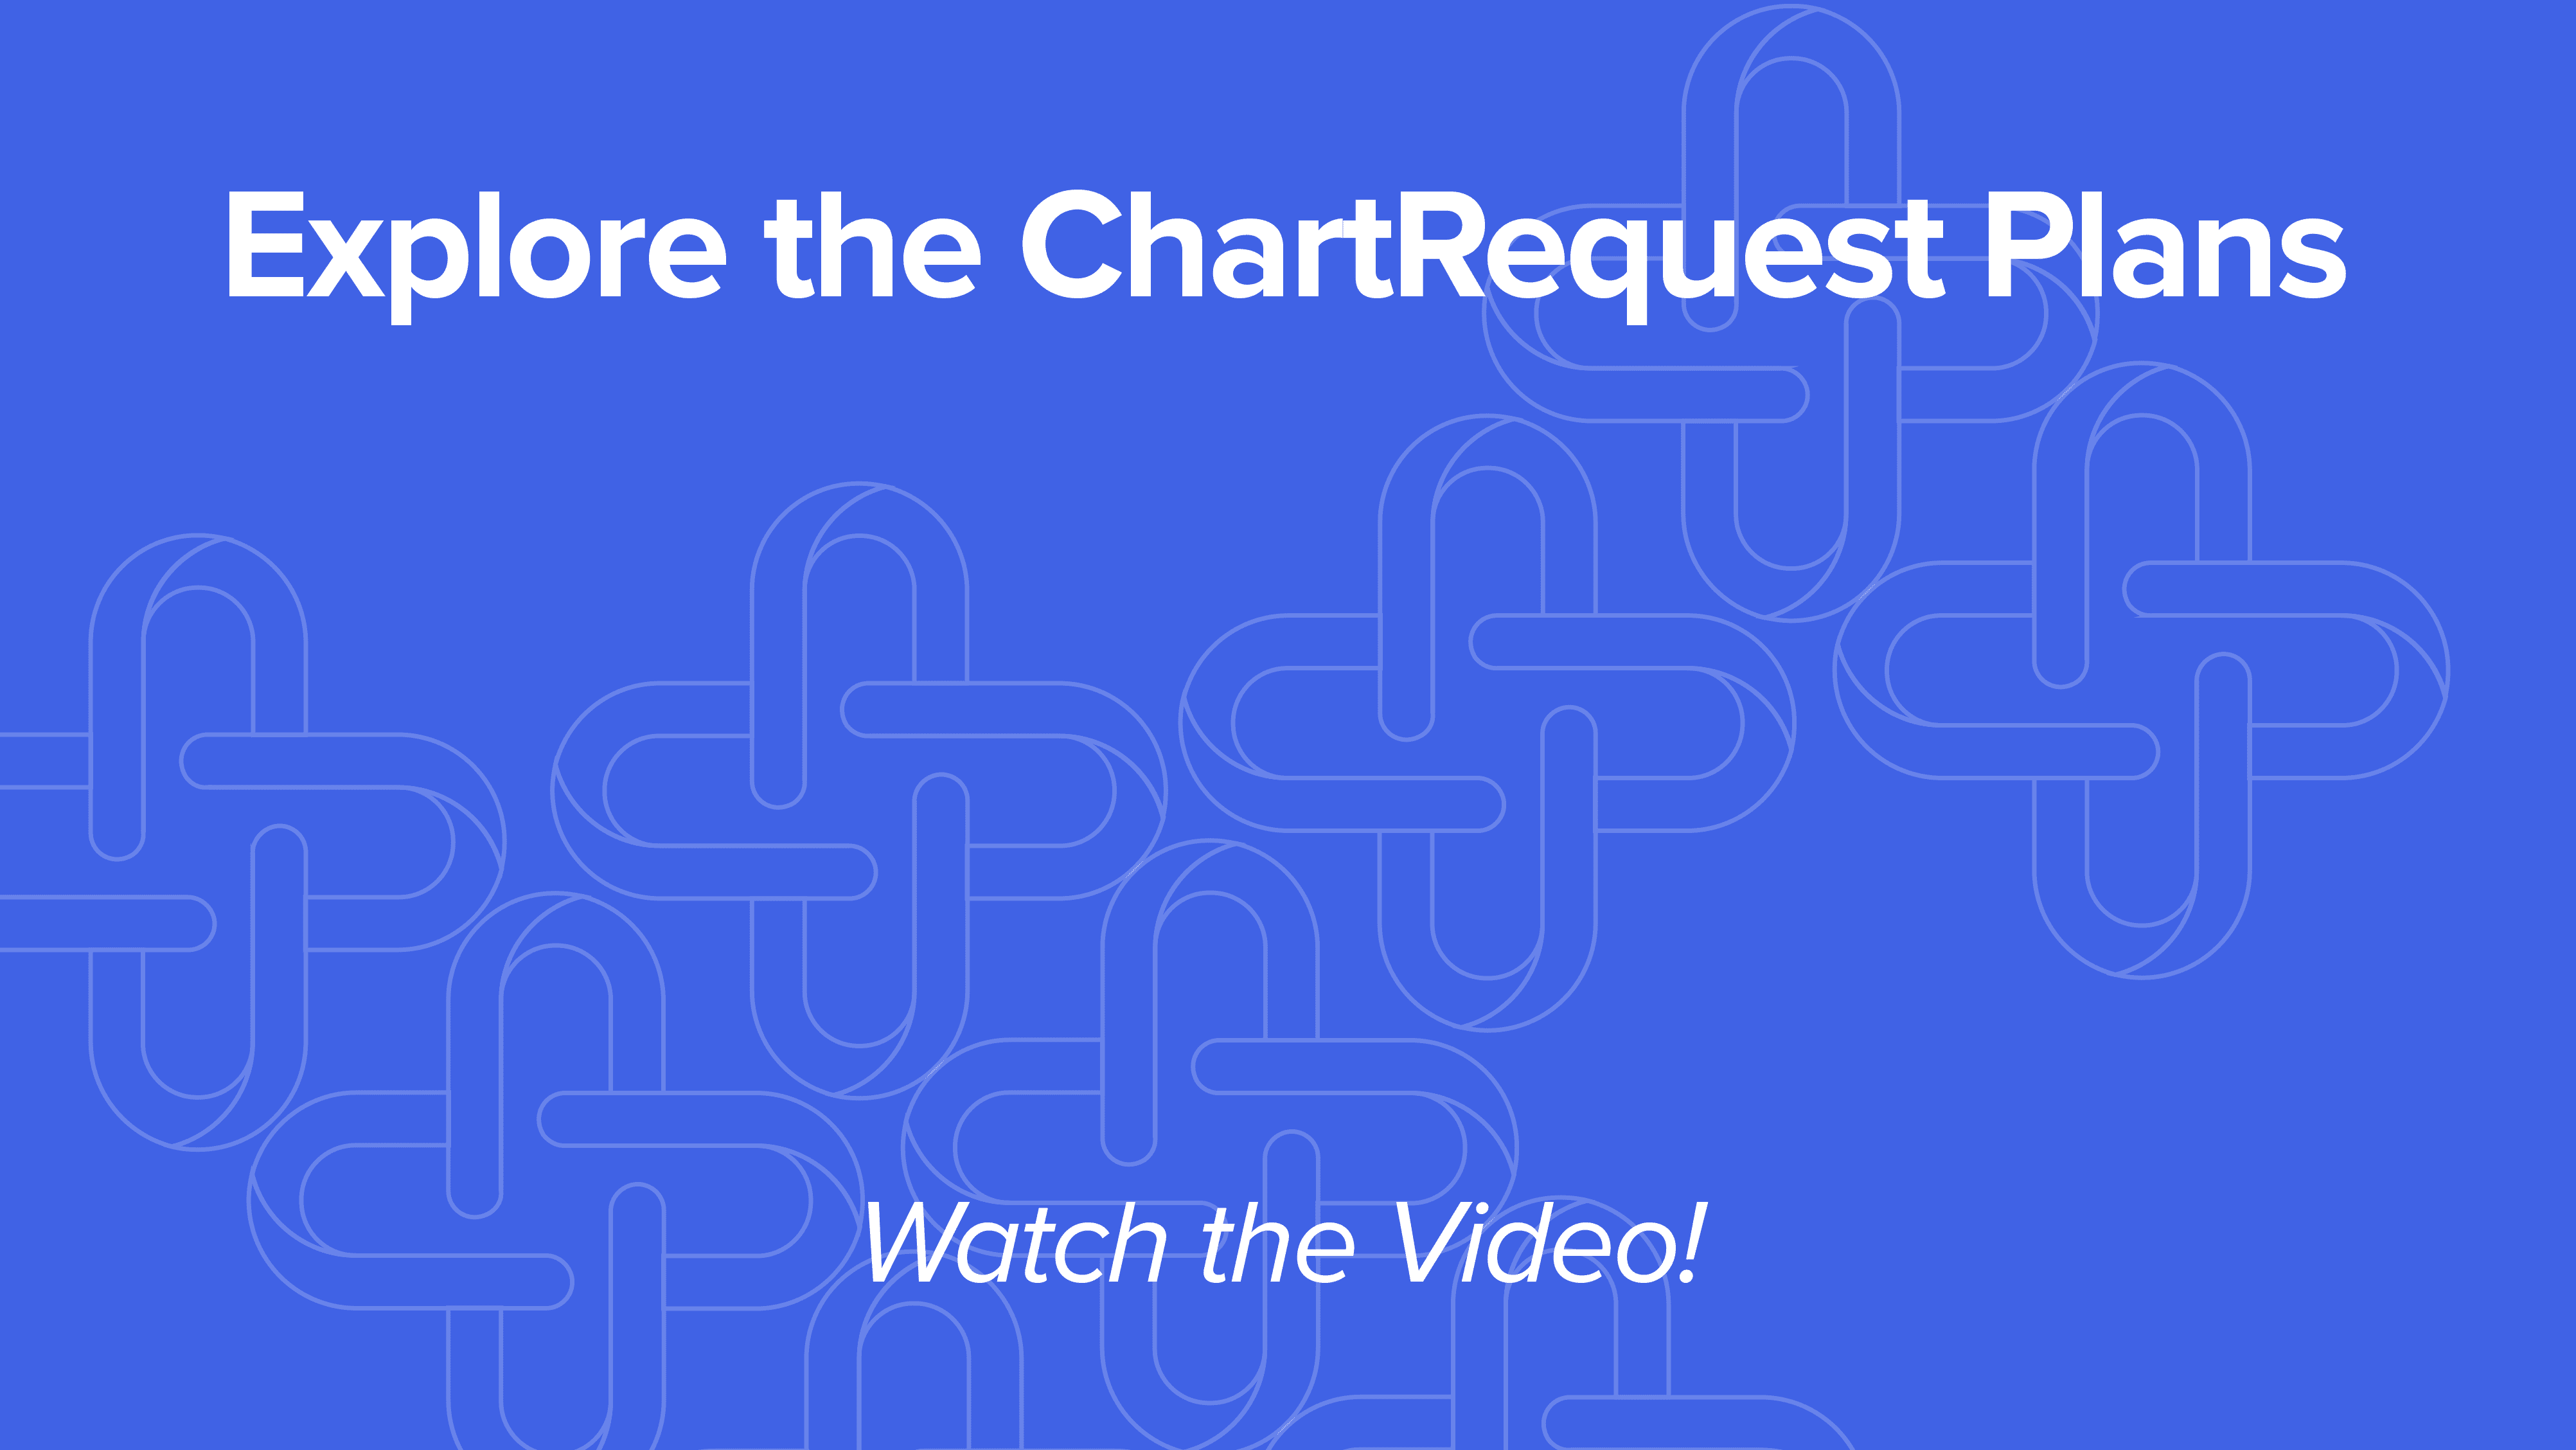 ChartRequest Plans Video